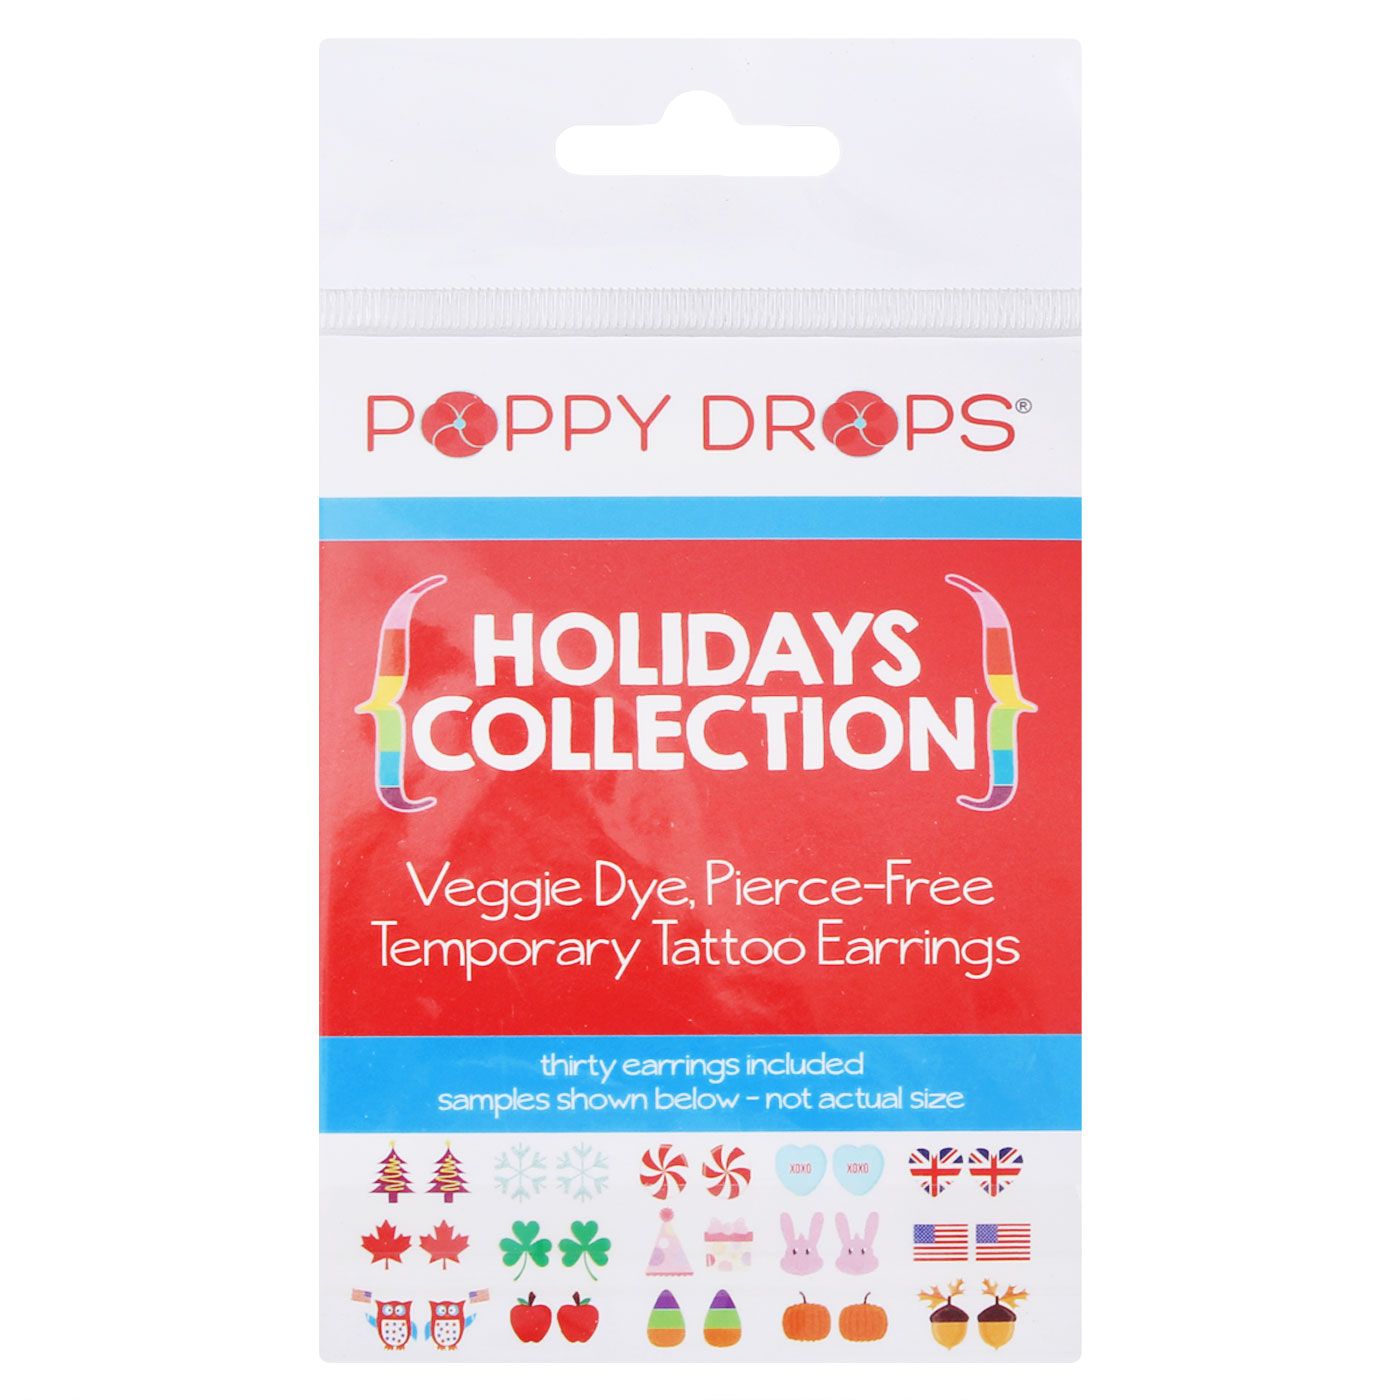 Poppy Drops Pierce-Free Earring Collection Holidays - 1